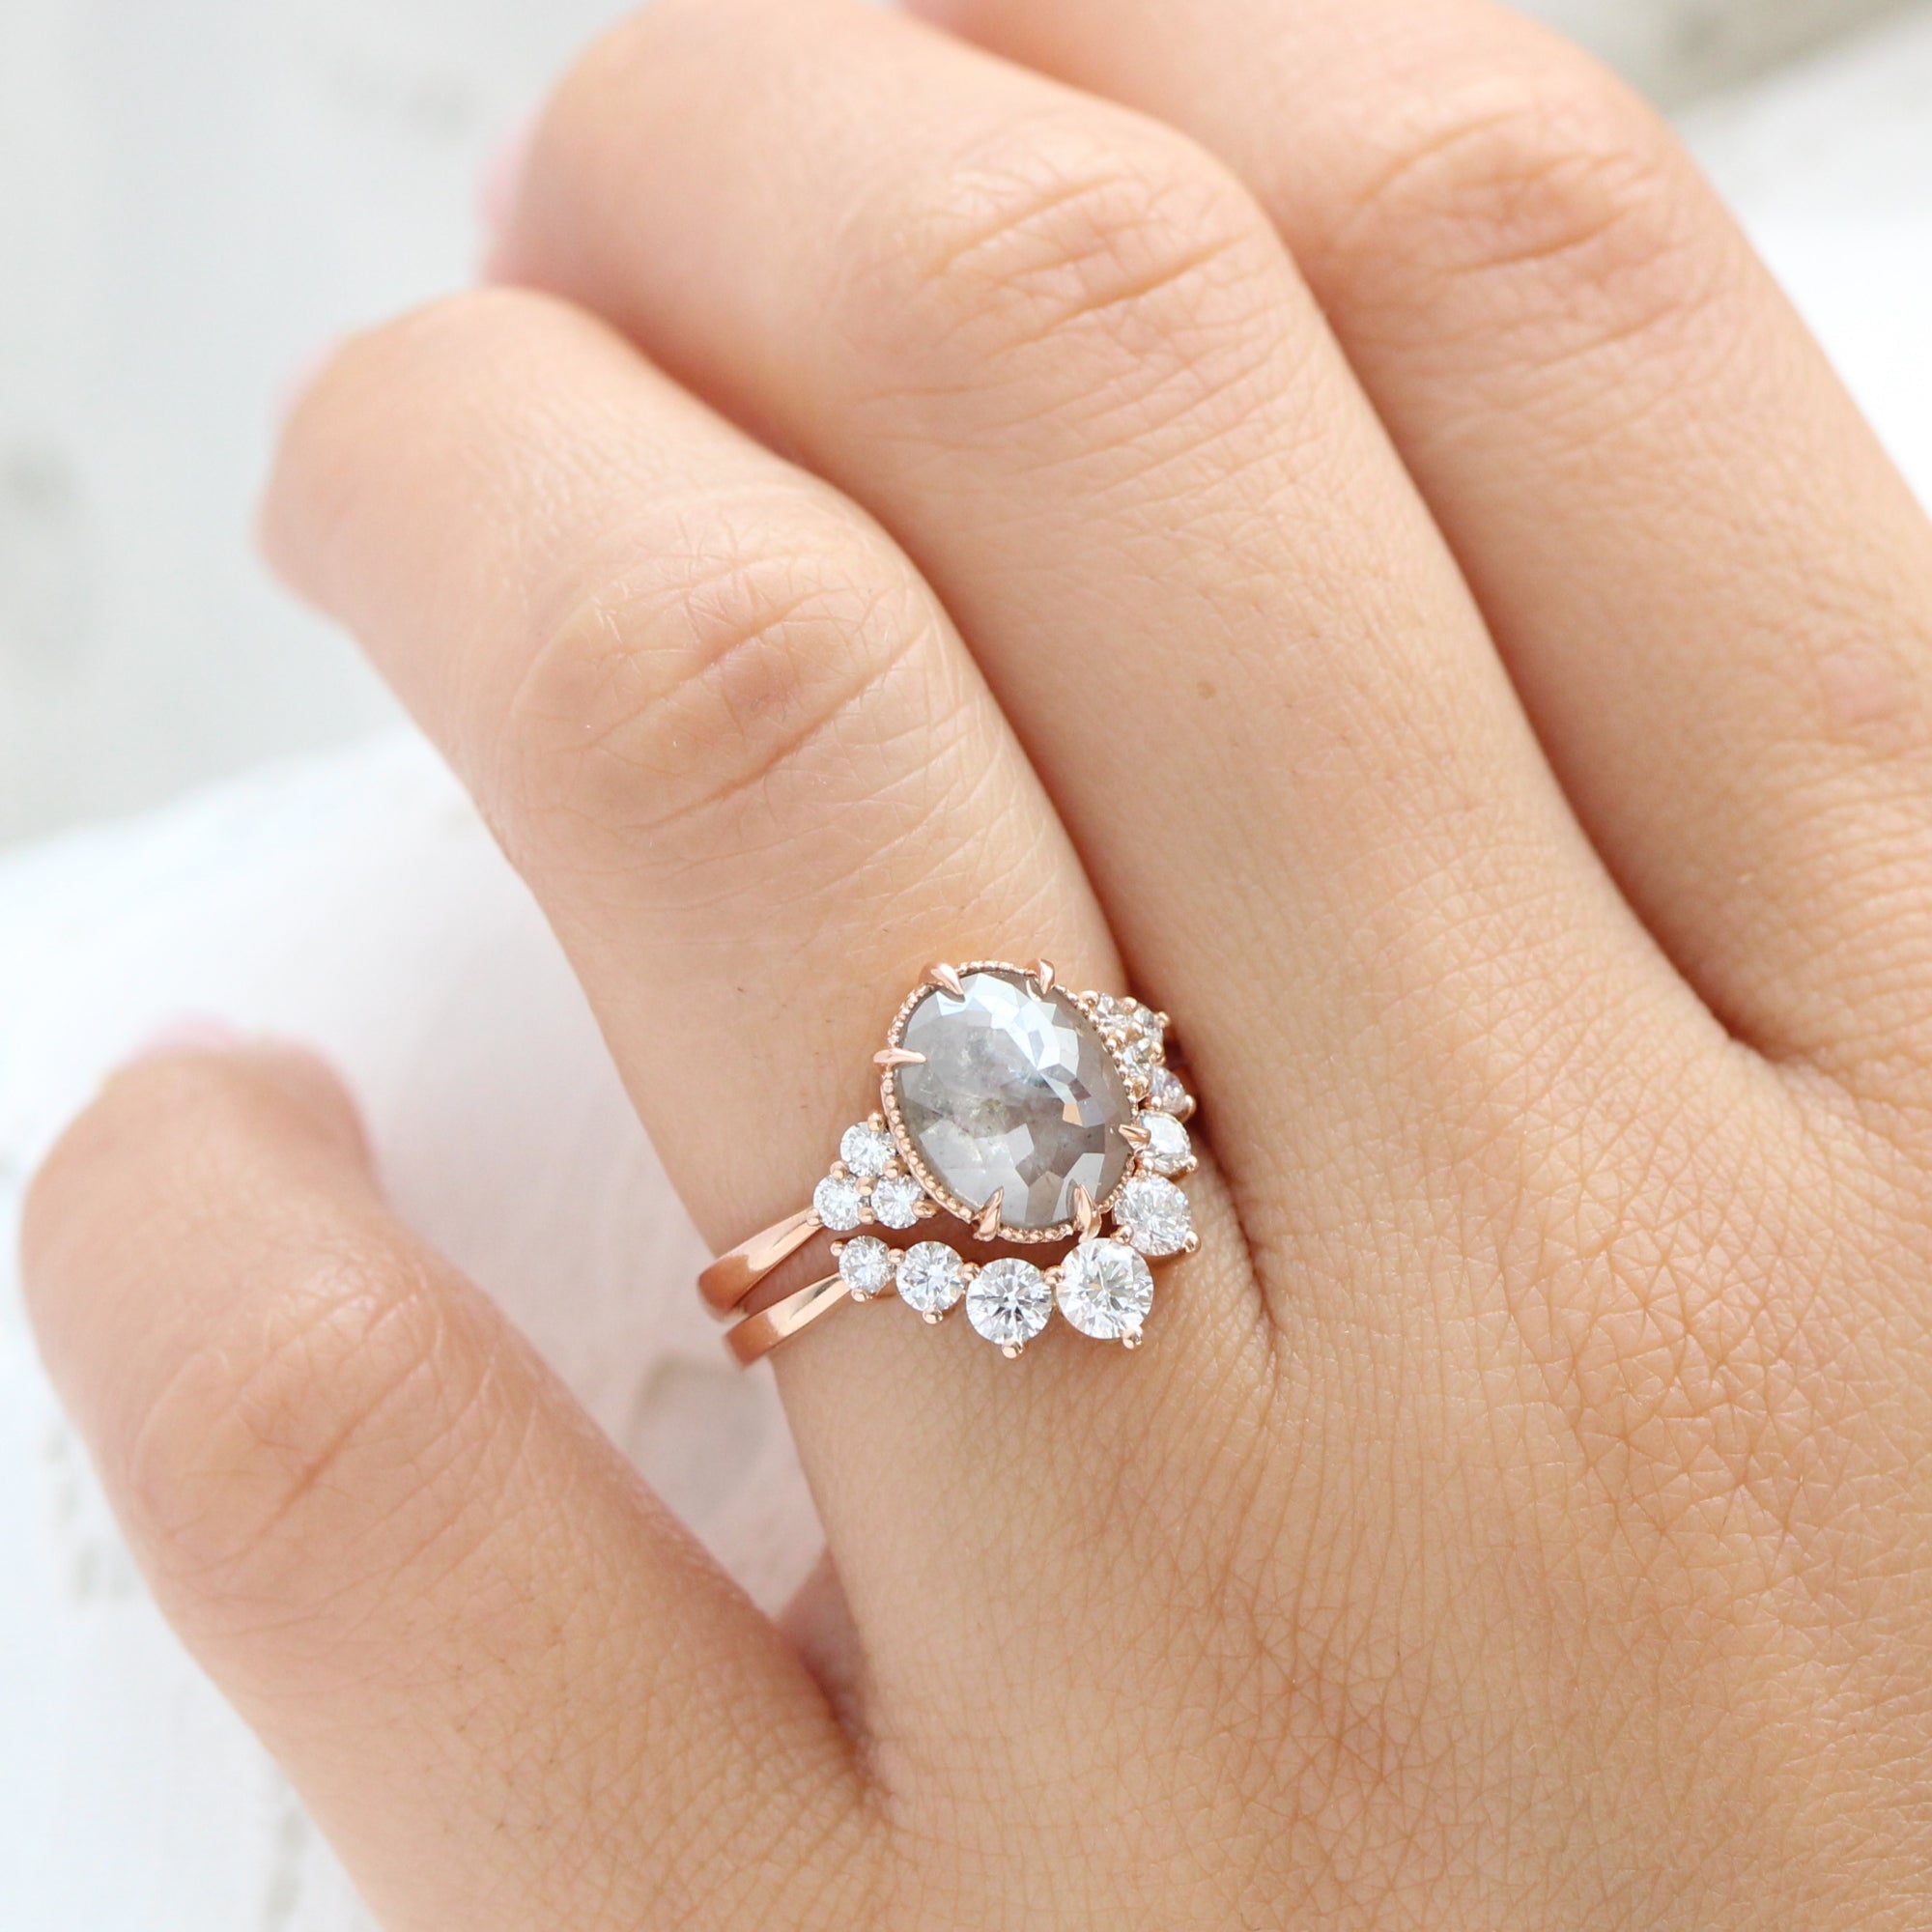 Oval salt and pepper diamond ring rose gold vintage 3 stone ring la more design jewelry